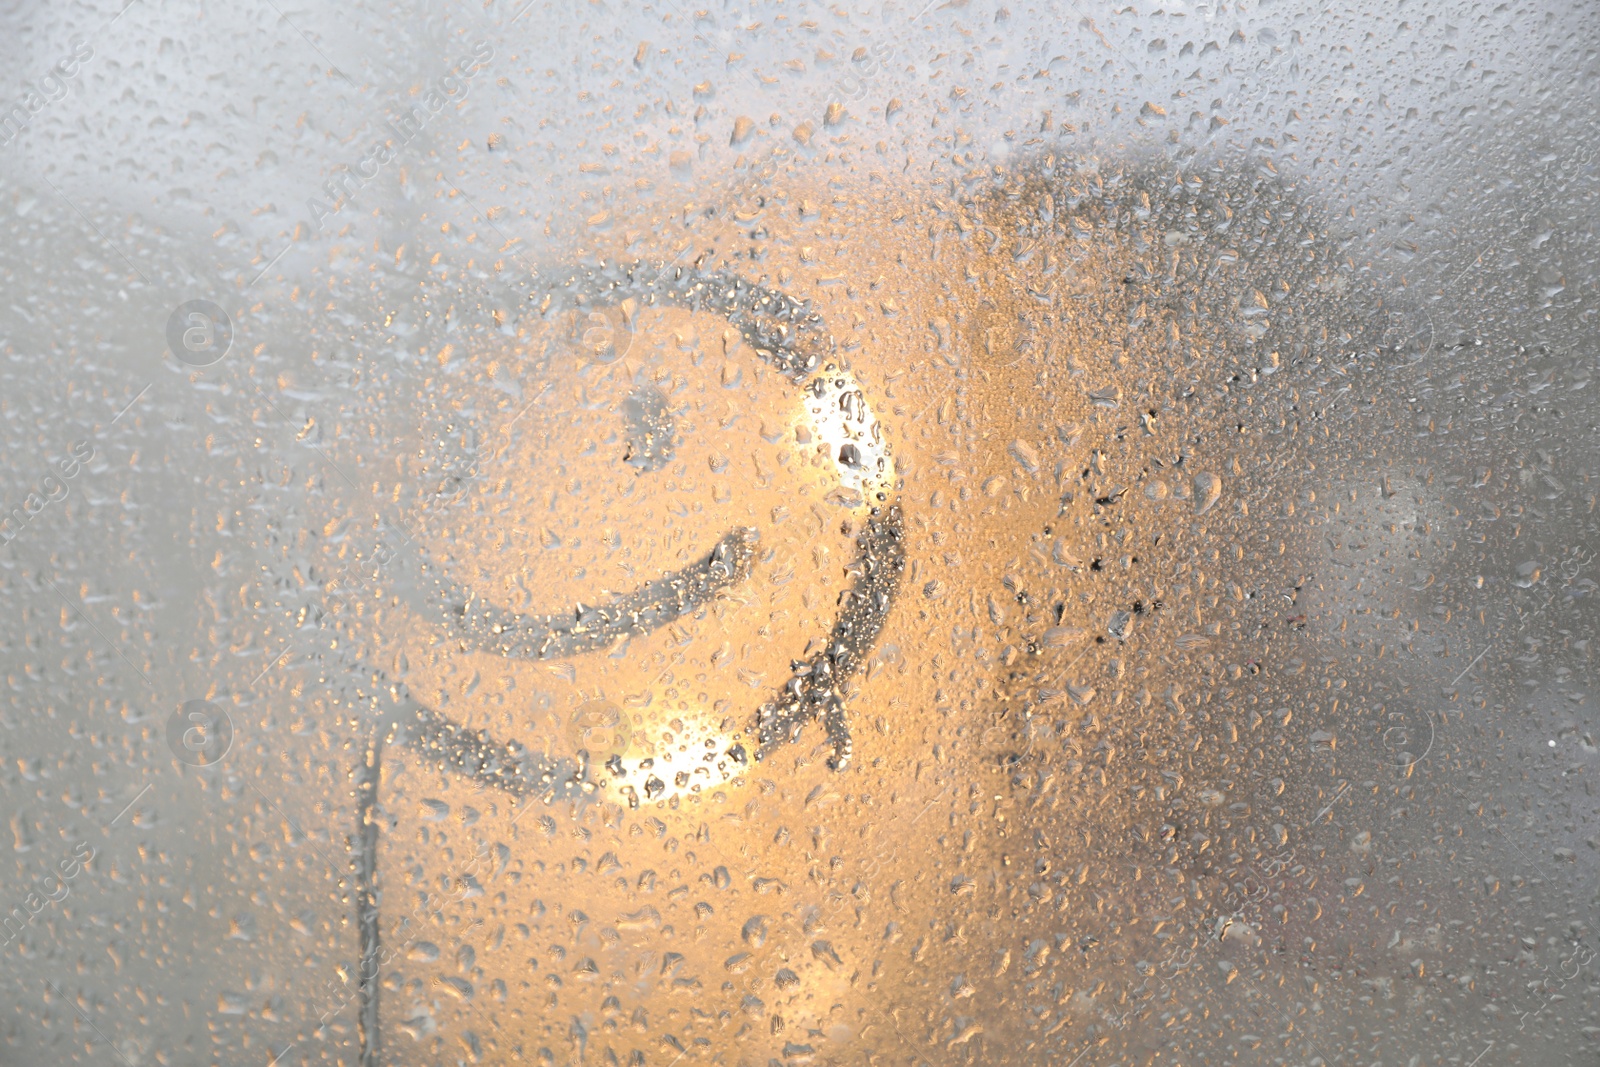 Photo of Happy face drawn on foggy window, space for text. Rainy weather